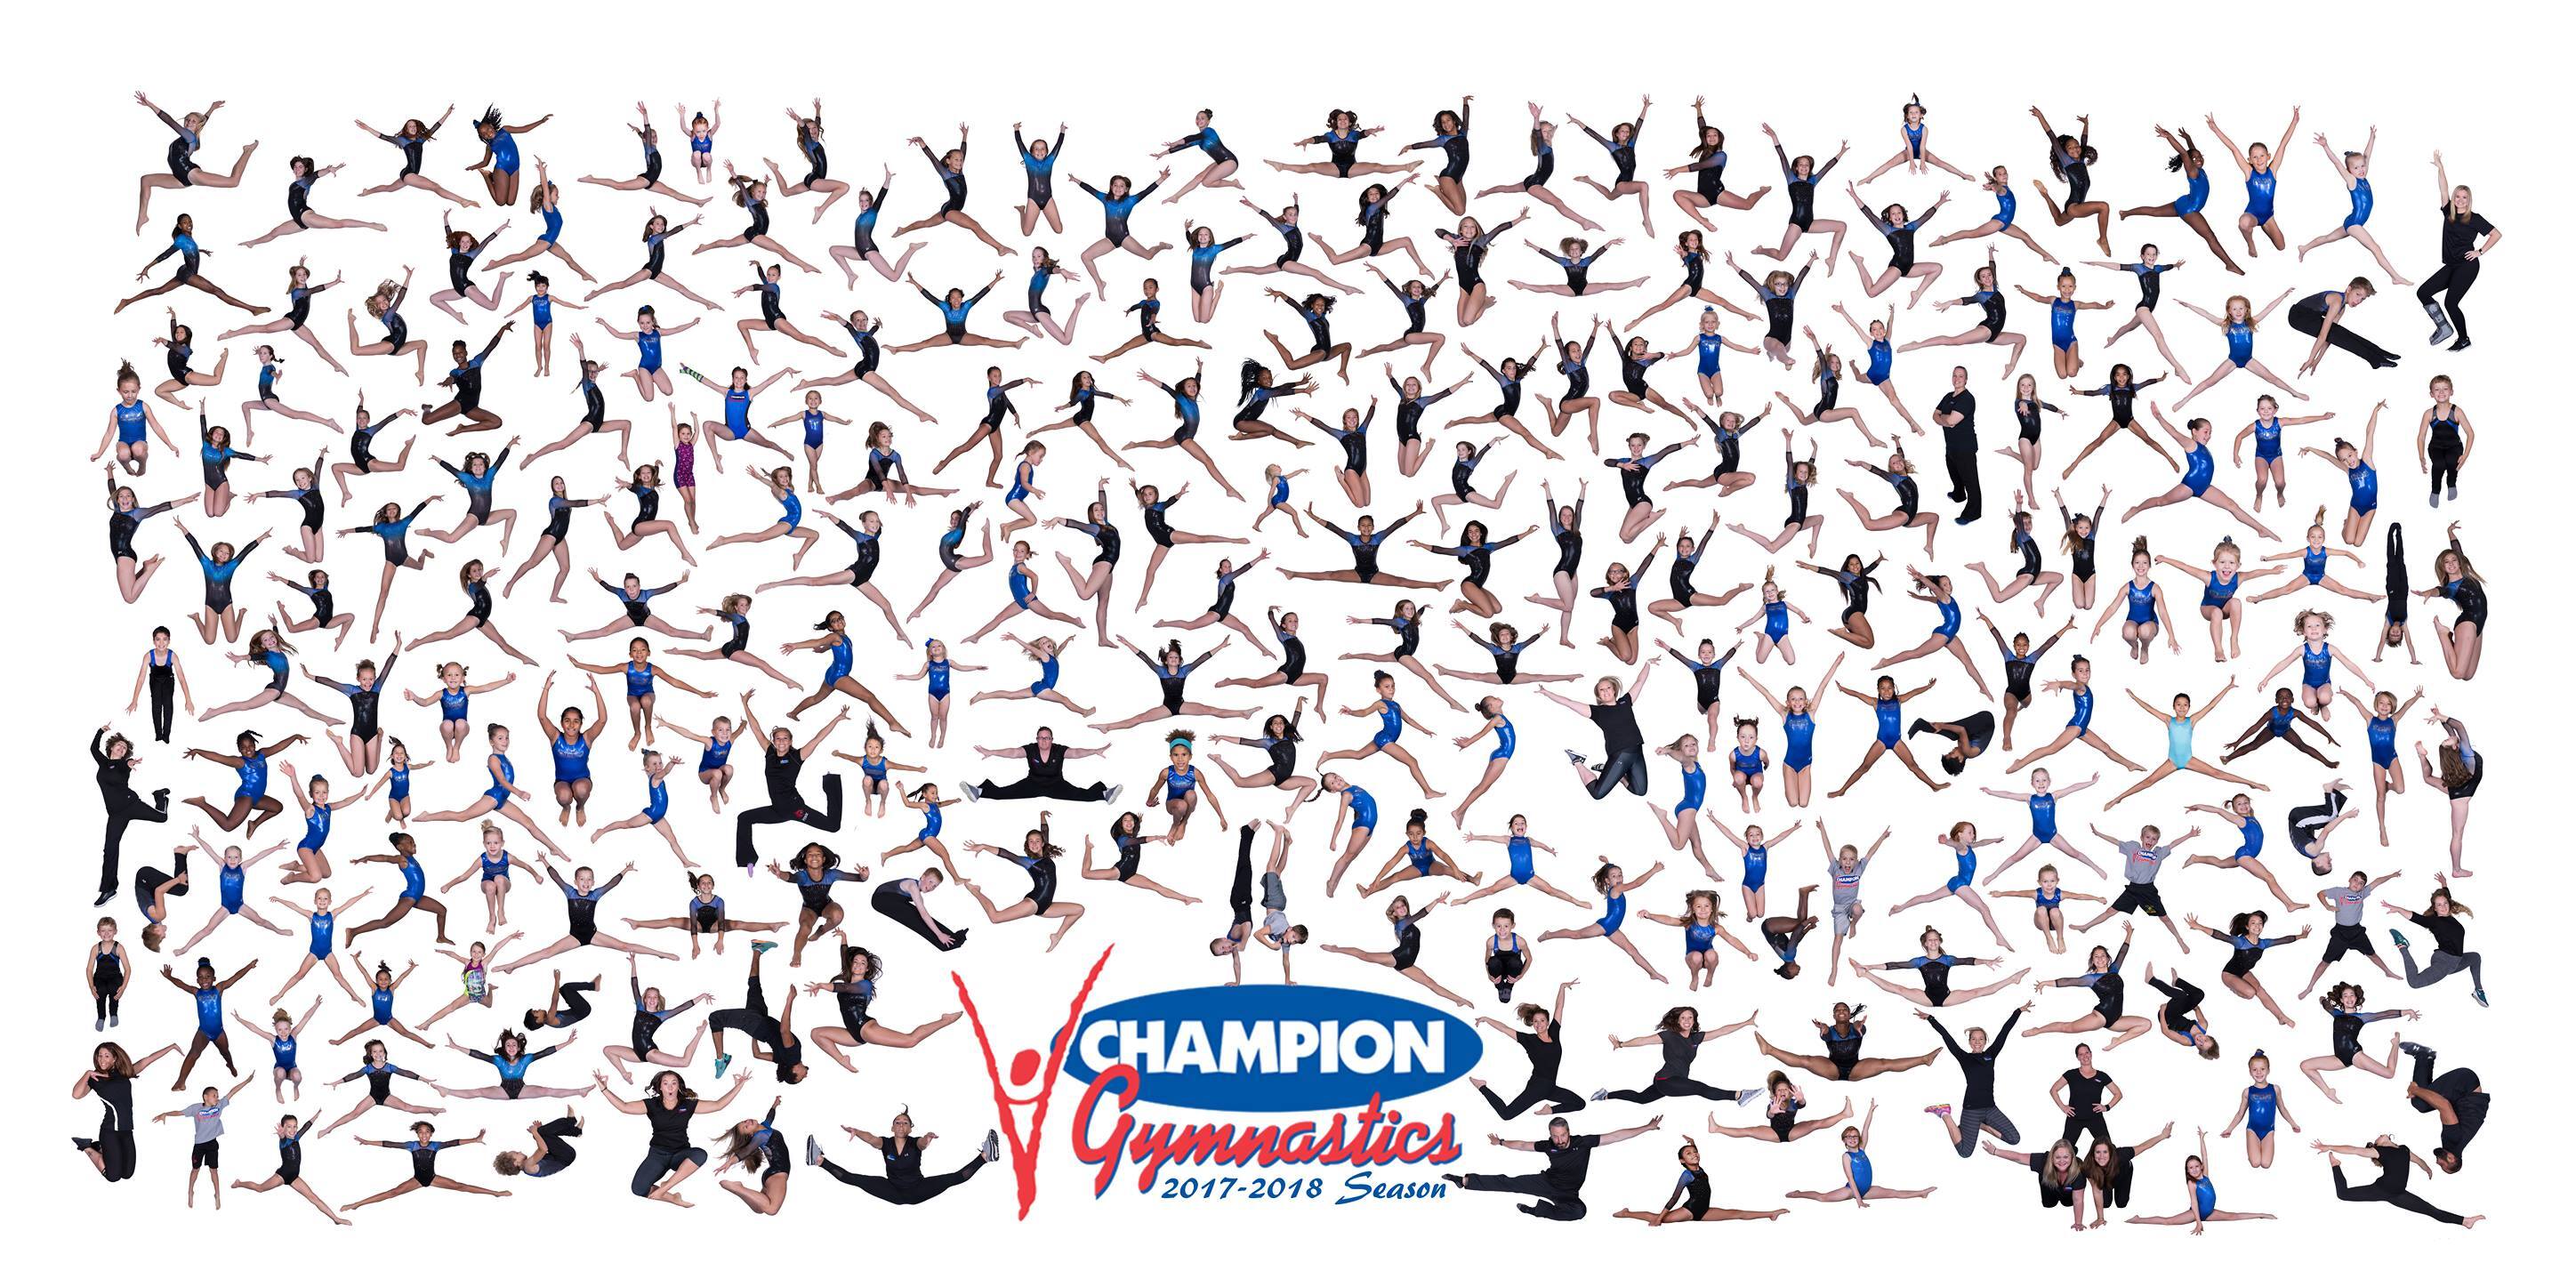 Champion Gymnastics - Full-Ins & Outs